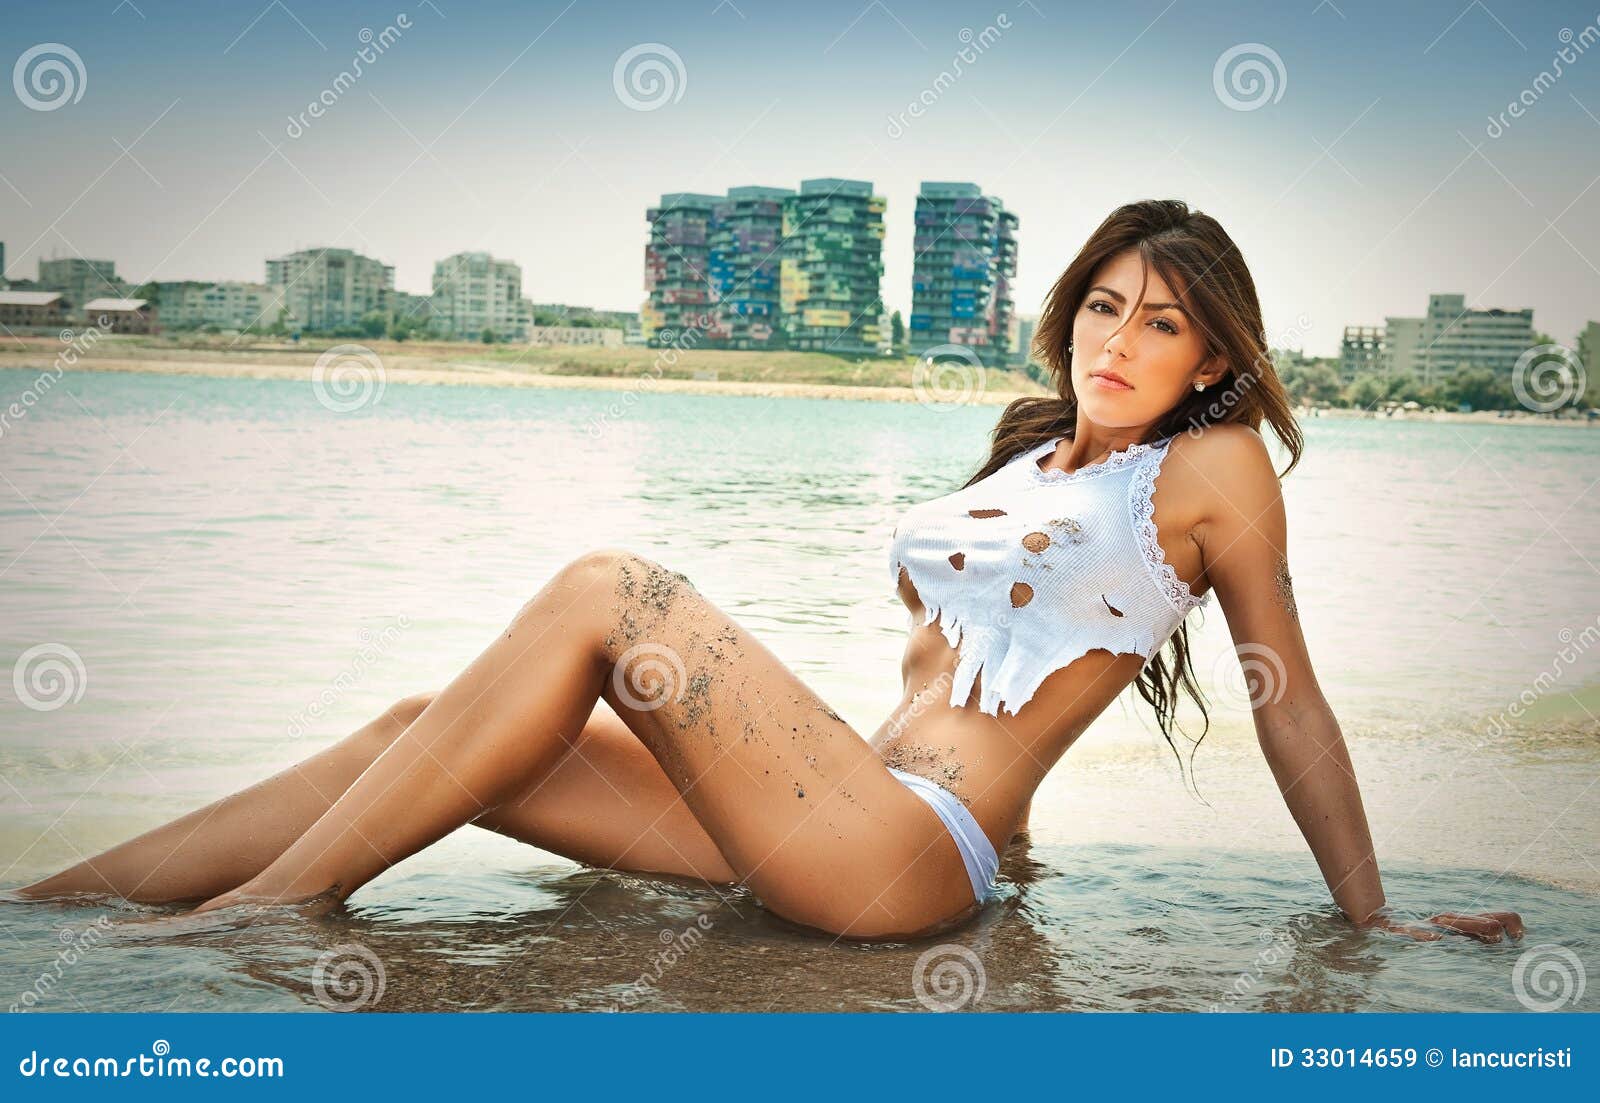 portrait of young brunette girl in white bikini and wet t-shirt at the beach